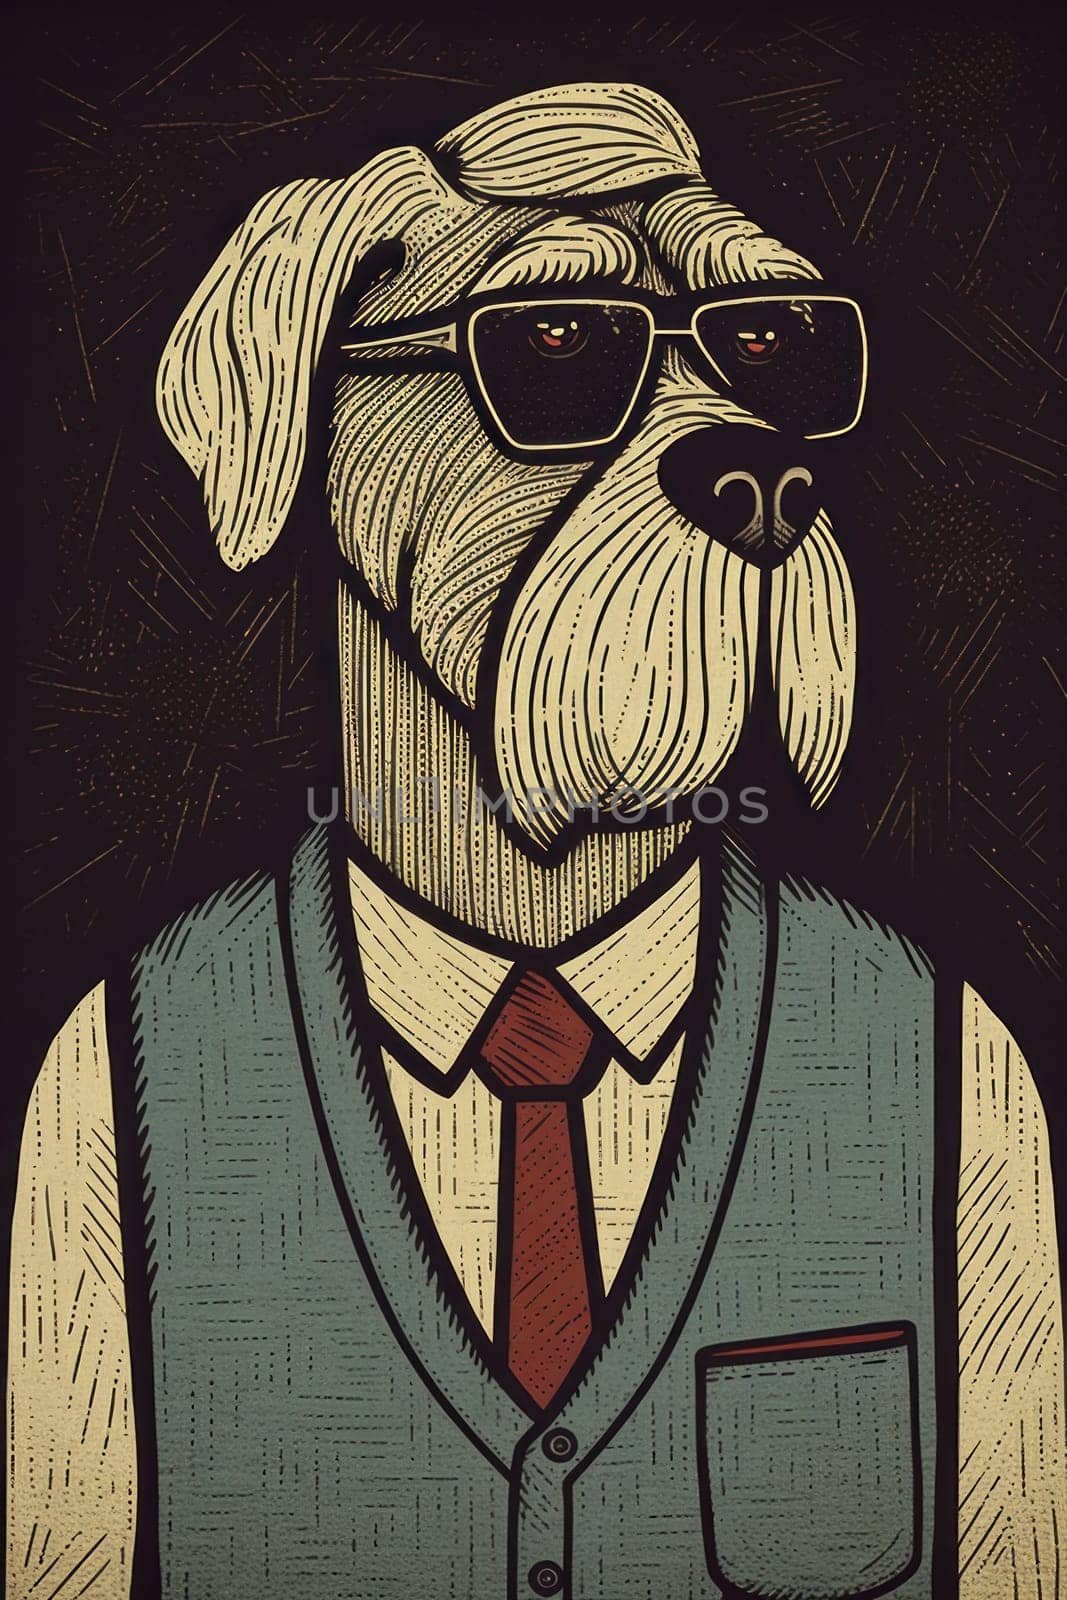 A drawing of a dog wearing glasses and a vest, AI by starush